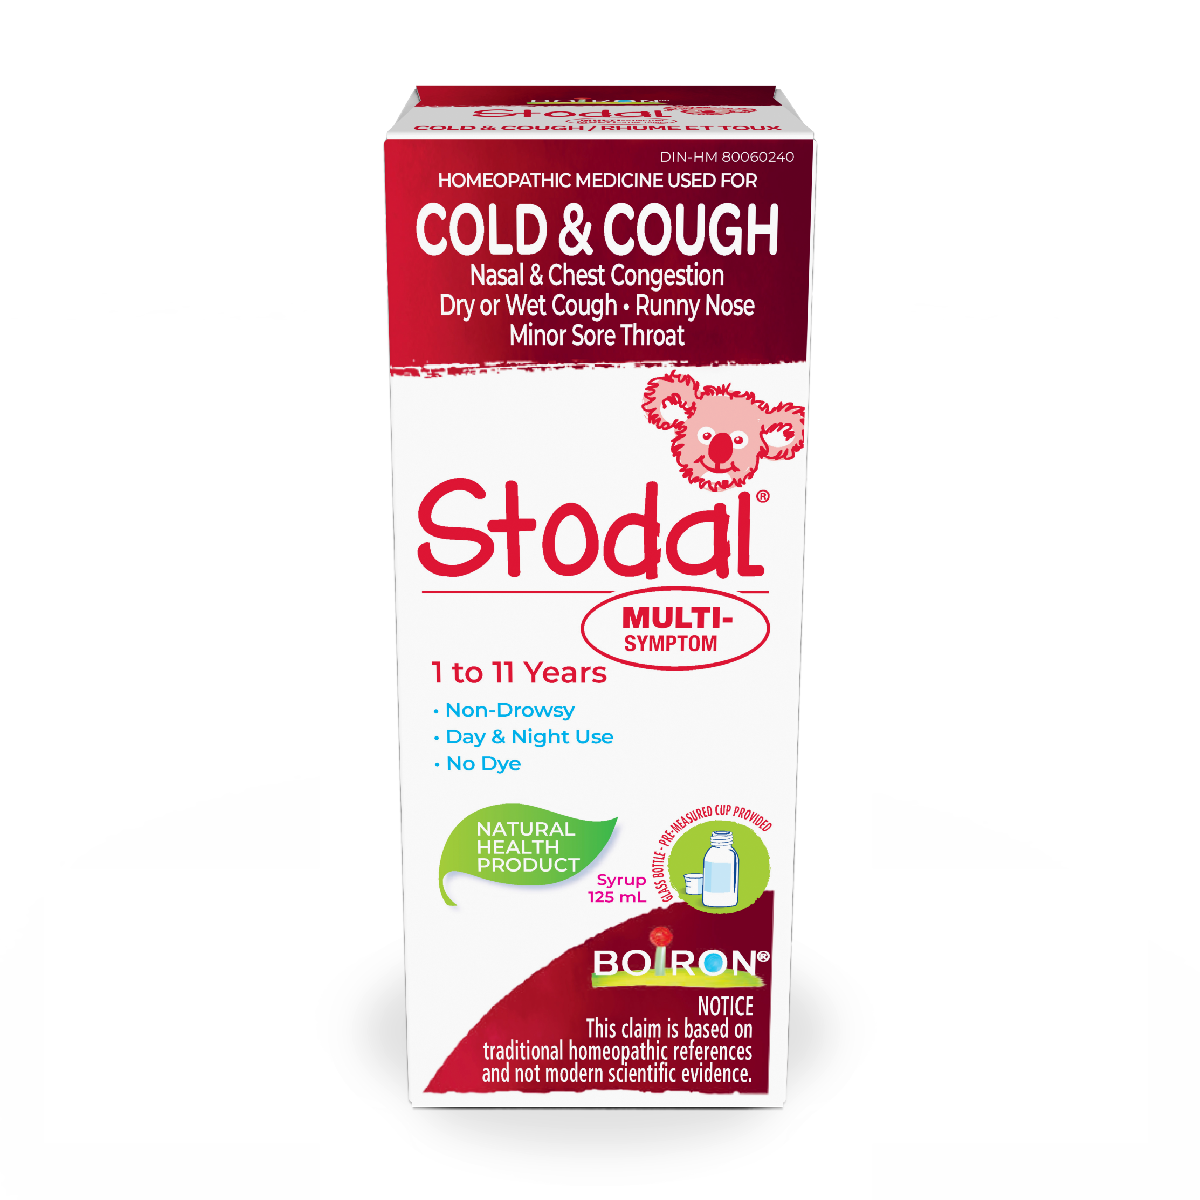 Boiron Stodal Multi-Symptom 1-11 Years Cold & Cough Syrup 125ml